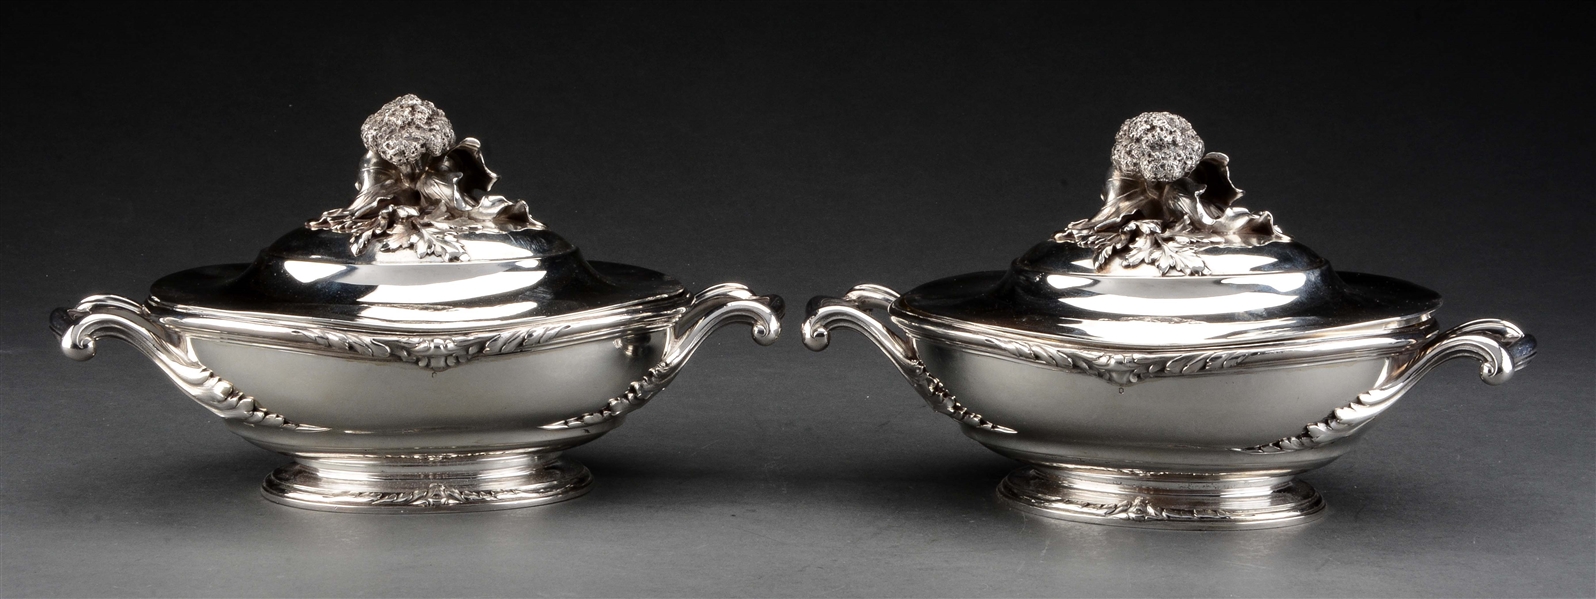 PAIR OF FRENCH COVERED VEGETABLE DISHES.